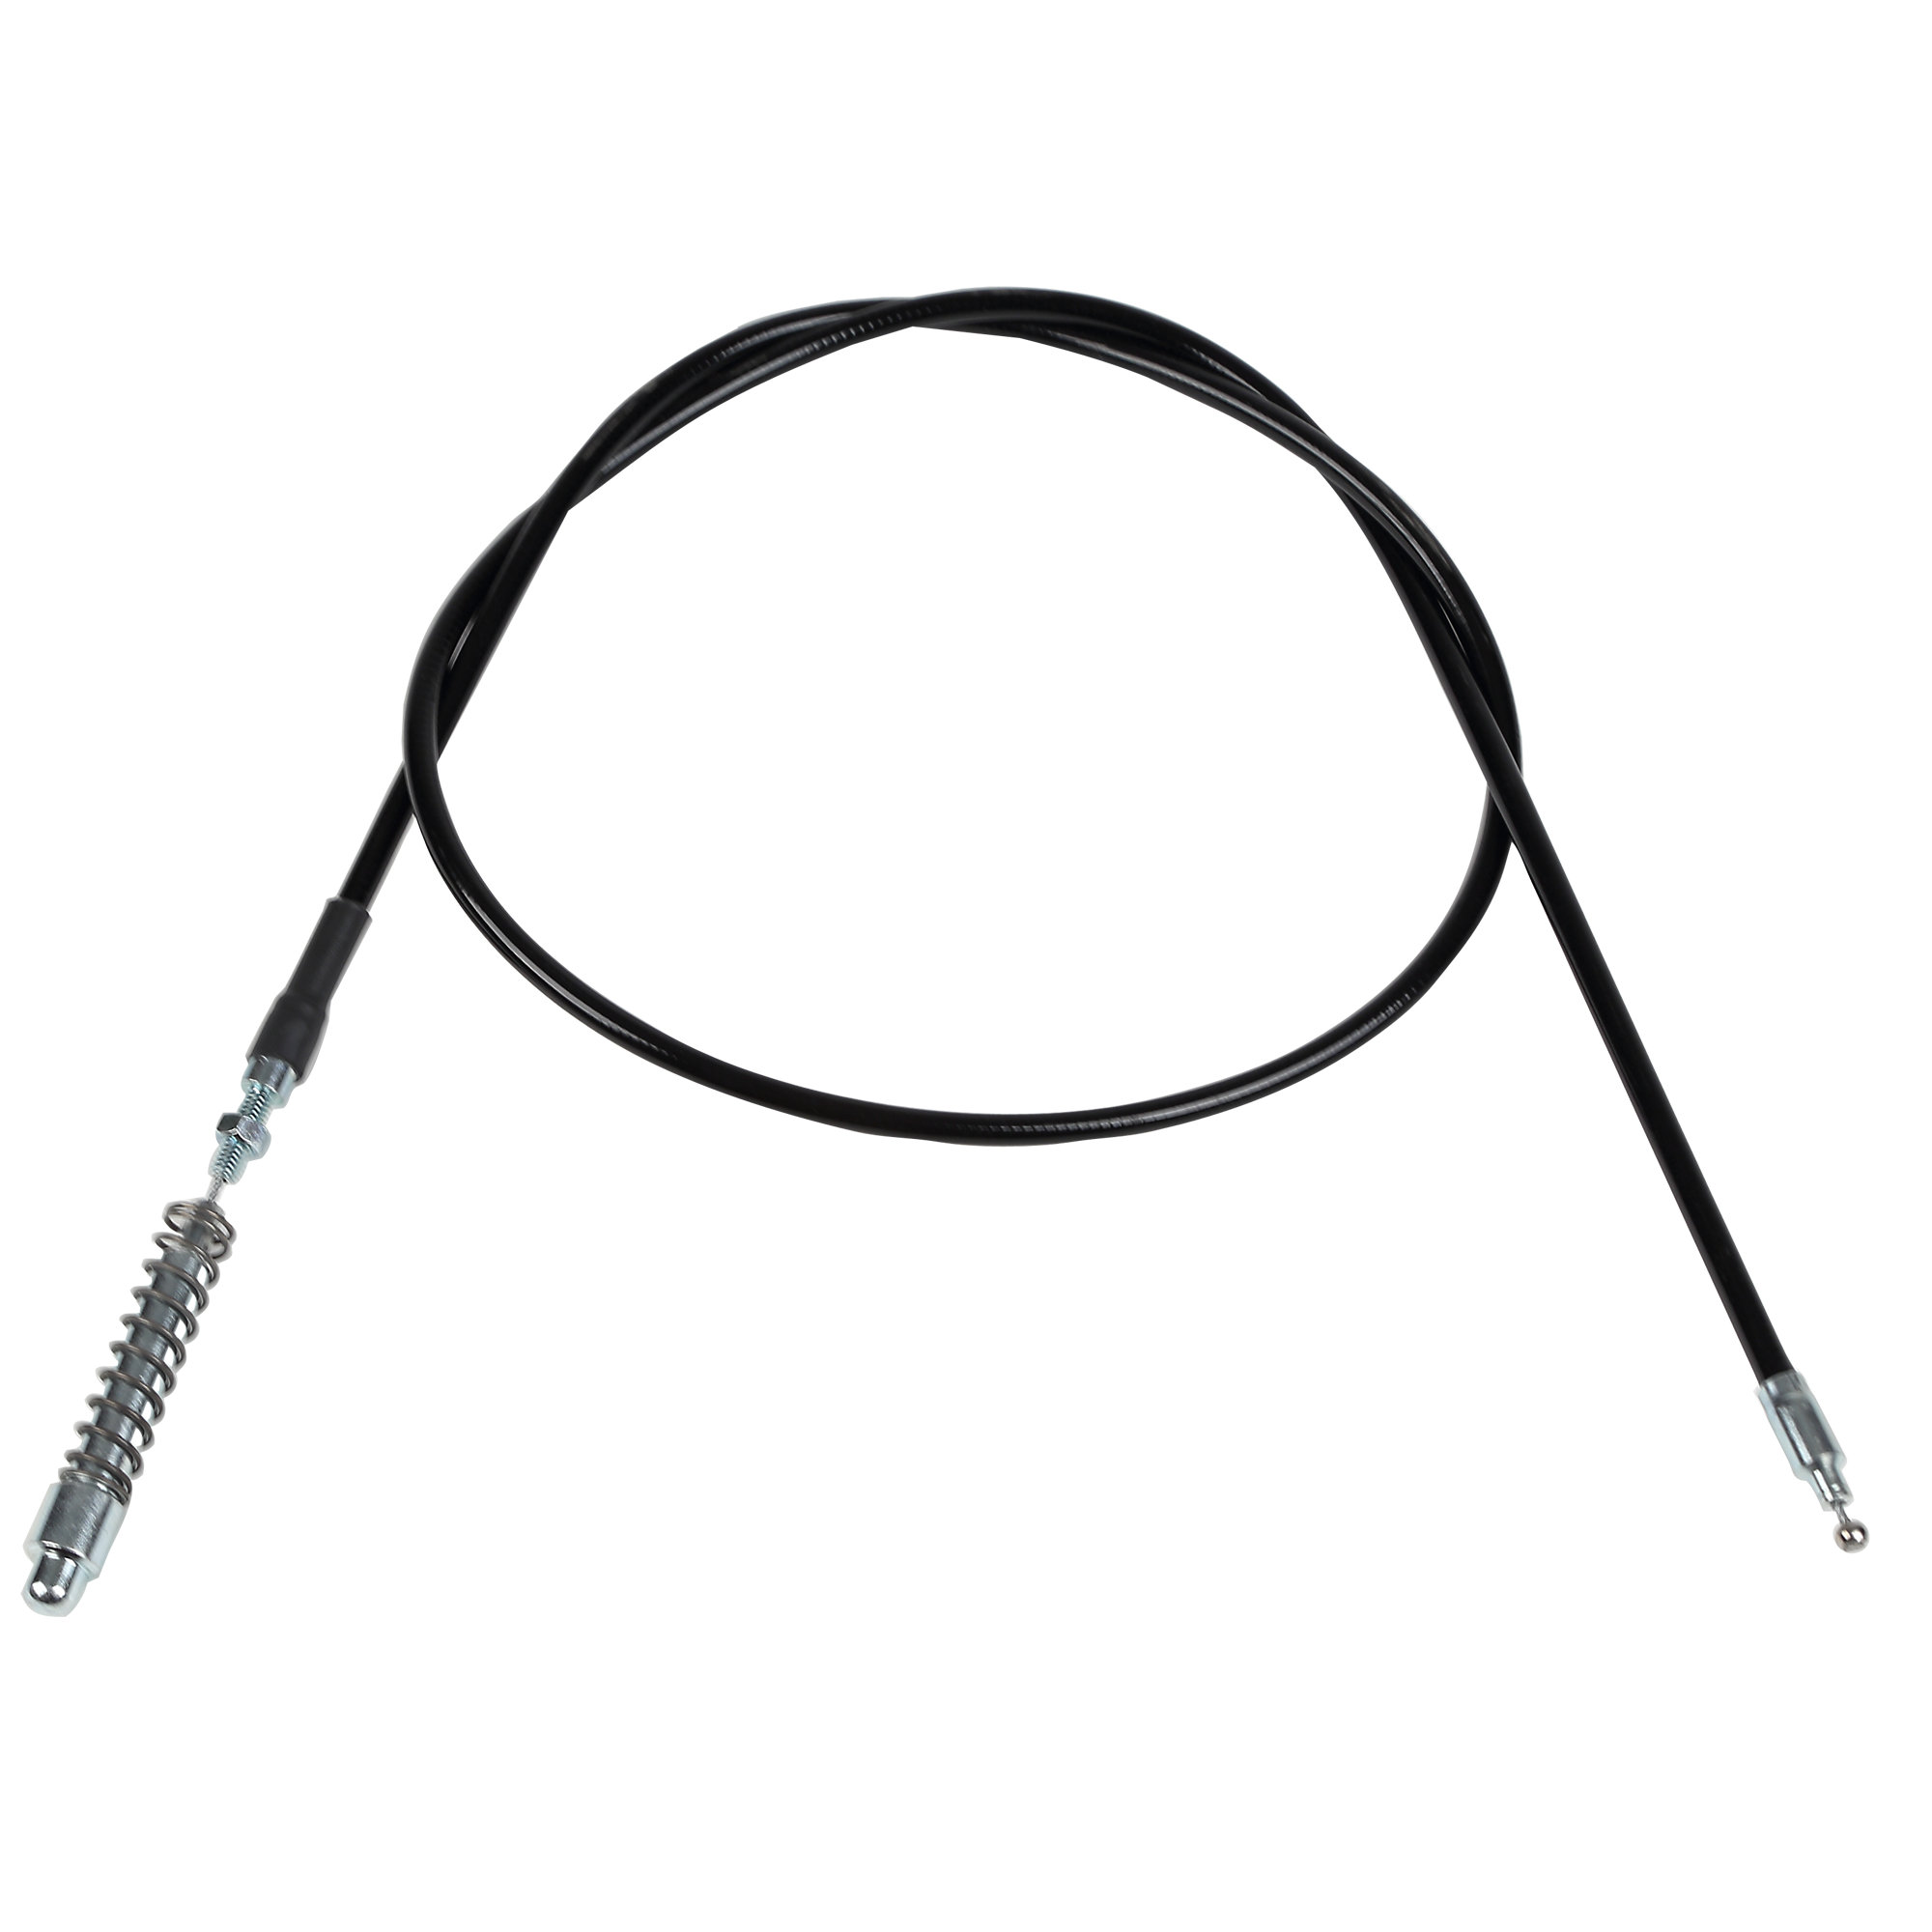 Push-Pull Cable for Right Work Arm to FZCP by LifeFitness